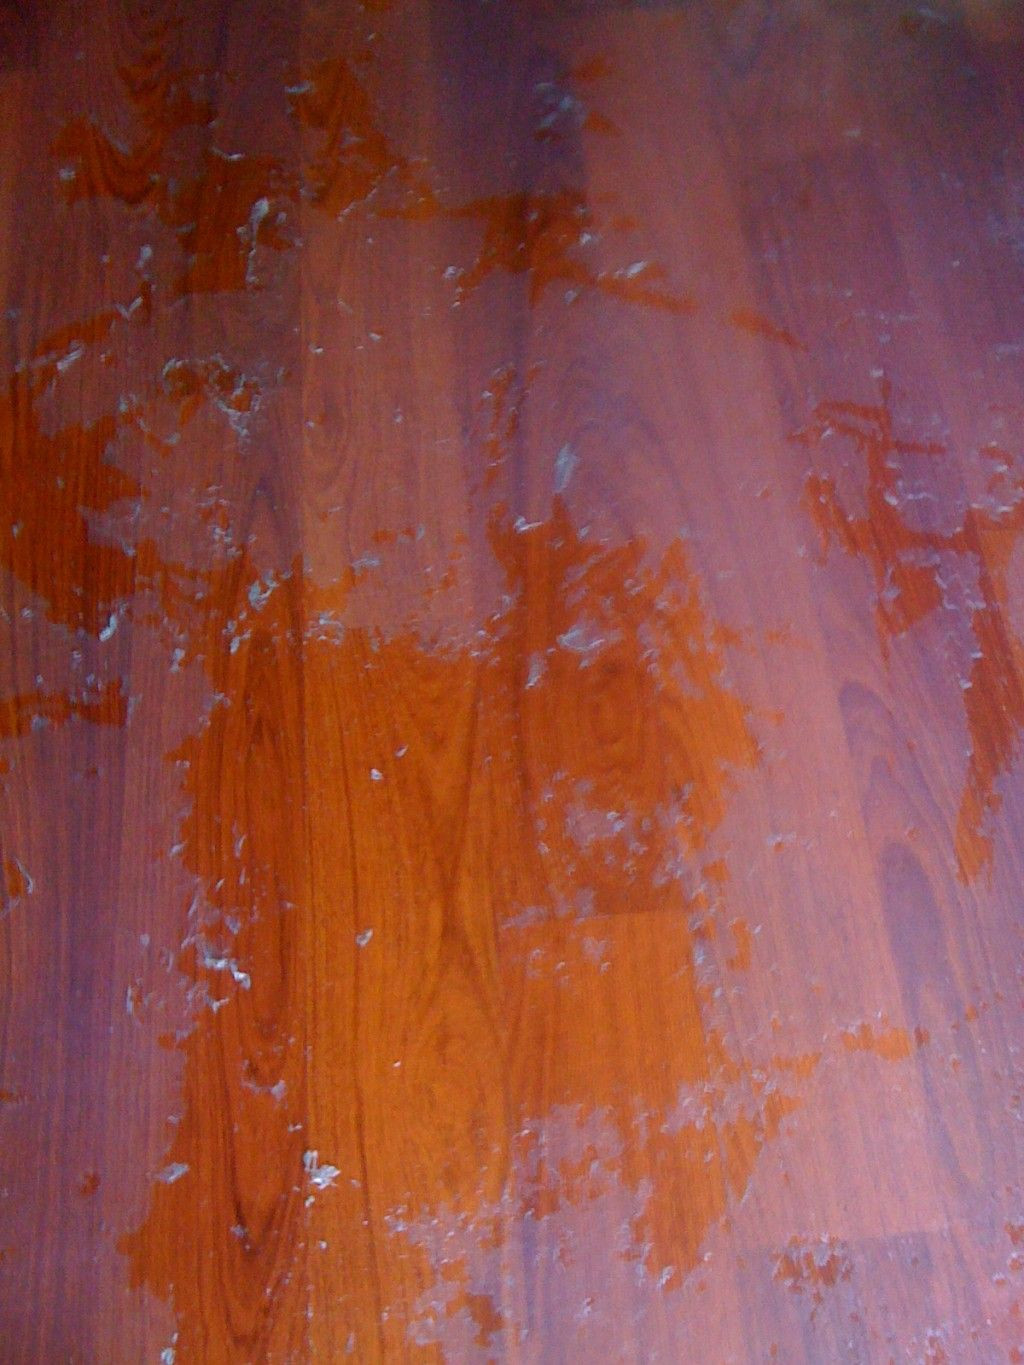 restoring hardwood floors under carpet of how to remove wax and oil soap cleaners from wood floors recipes for how to remove oily or wax build up from cleaning or polishing solutions from wood floors